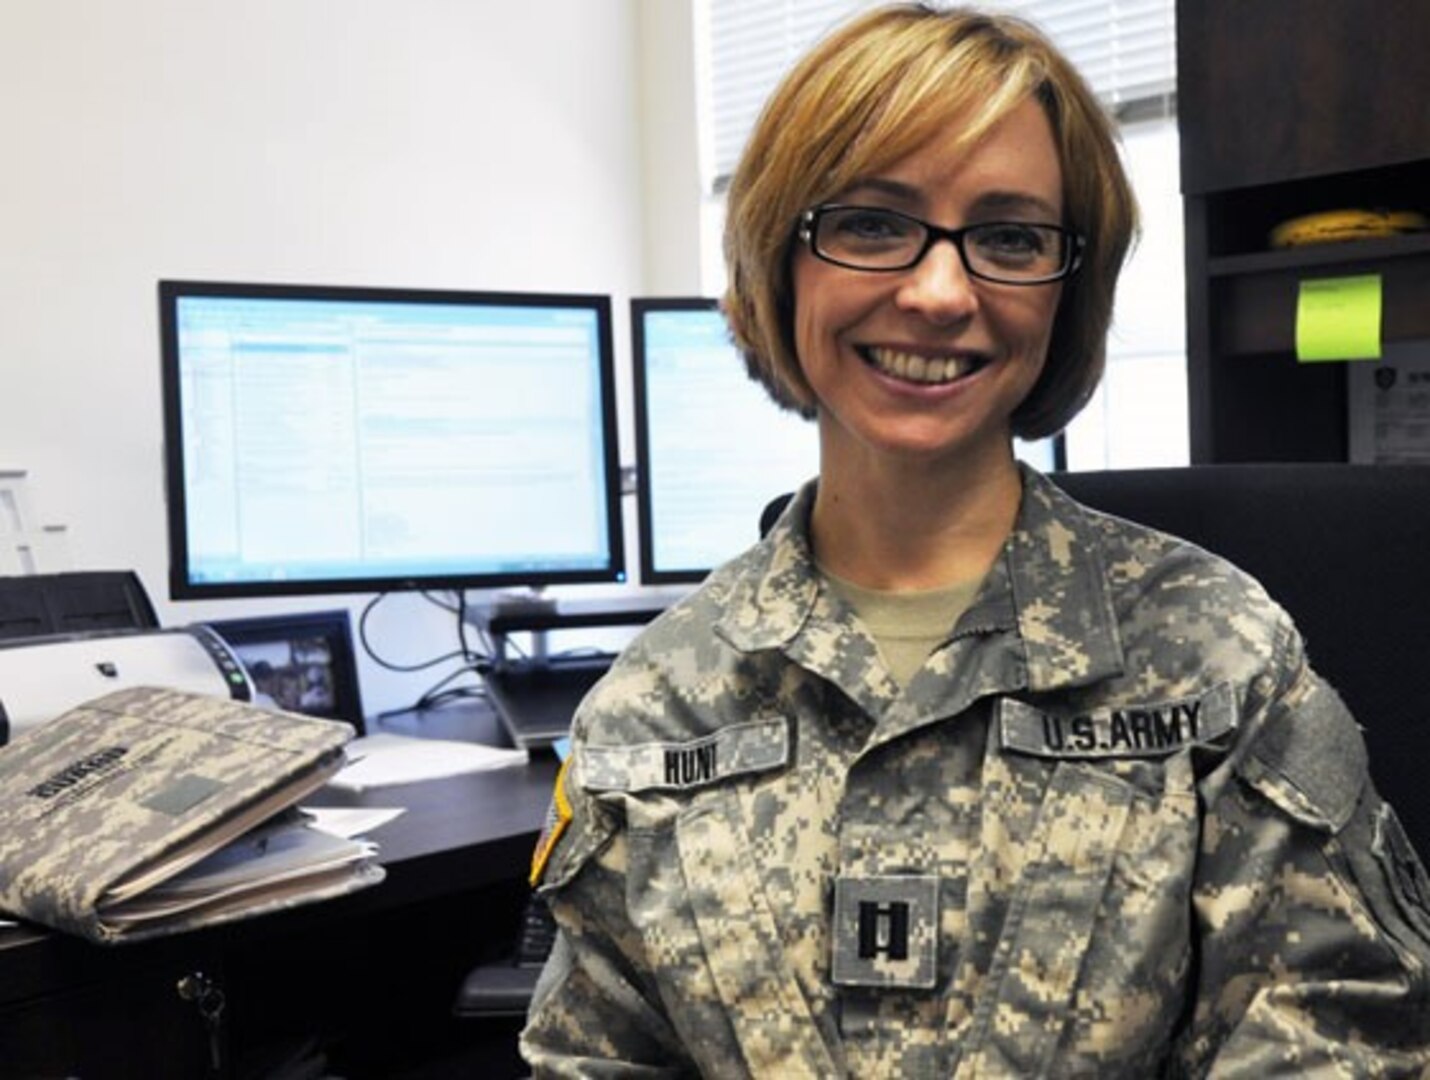 The Florida National Guard's Capt. Jennifer Hunt was chosen as one of the 2013 Department of Defense's Sexual Assault Prevention and Response Office (SAPRO) Exceptional Sexual Assault Response Coordinators (SARC), representing all National Guard SARCs in the nation.